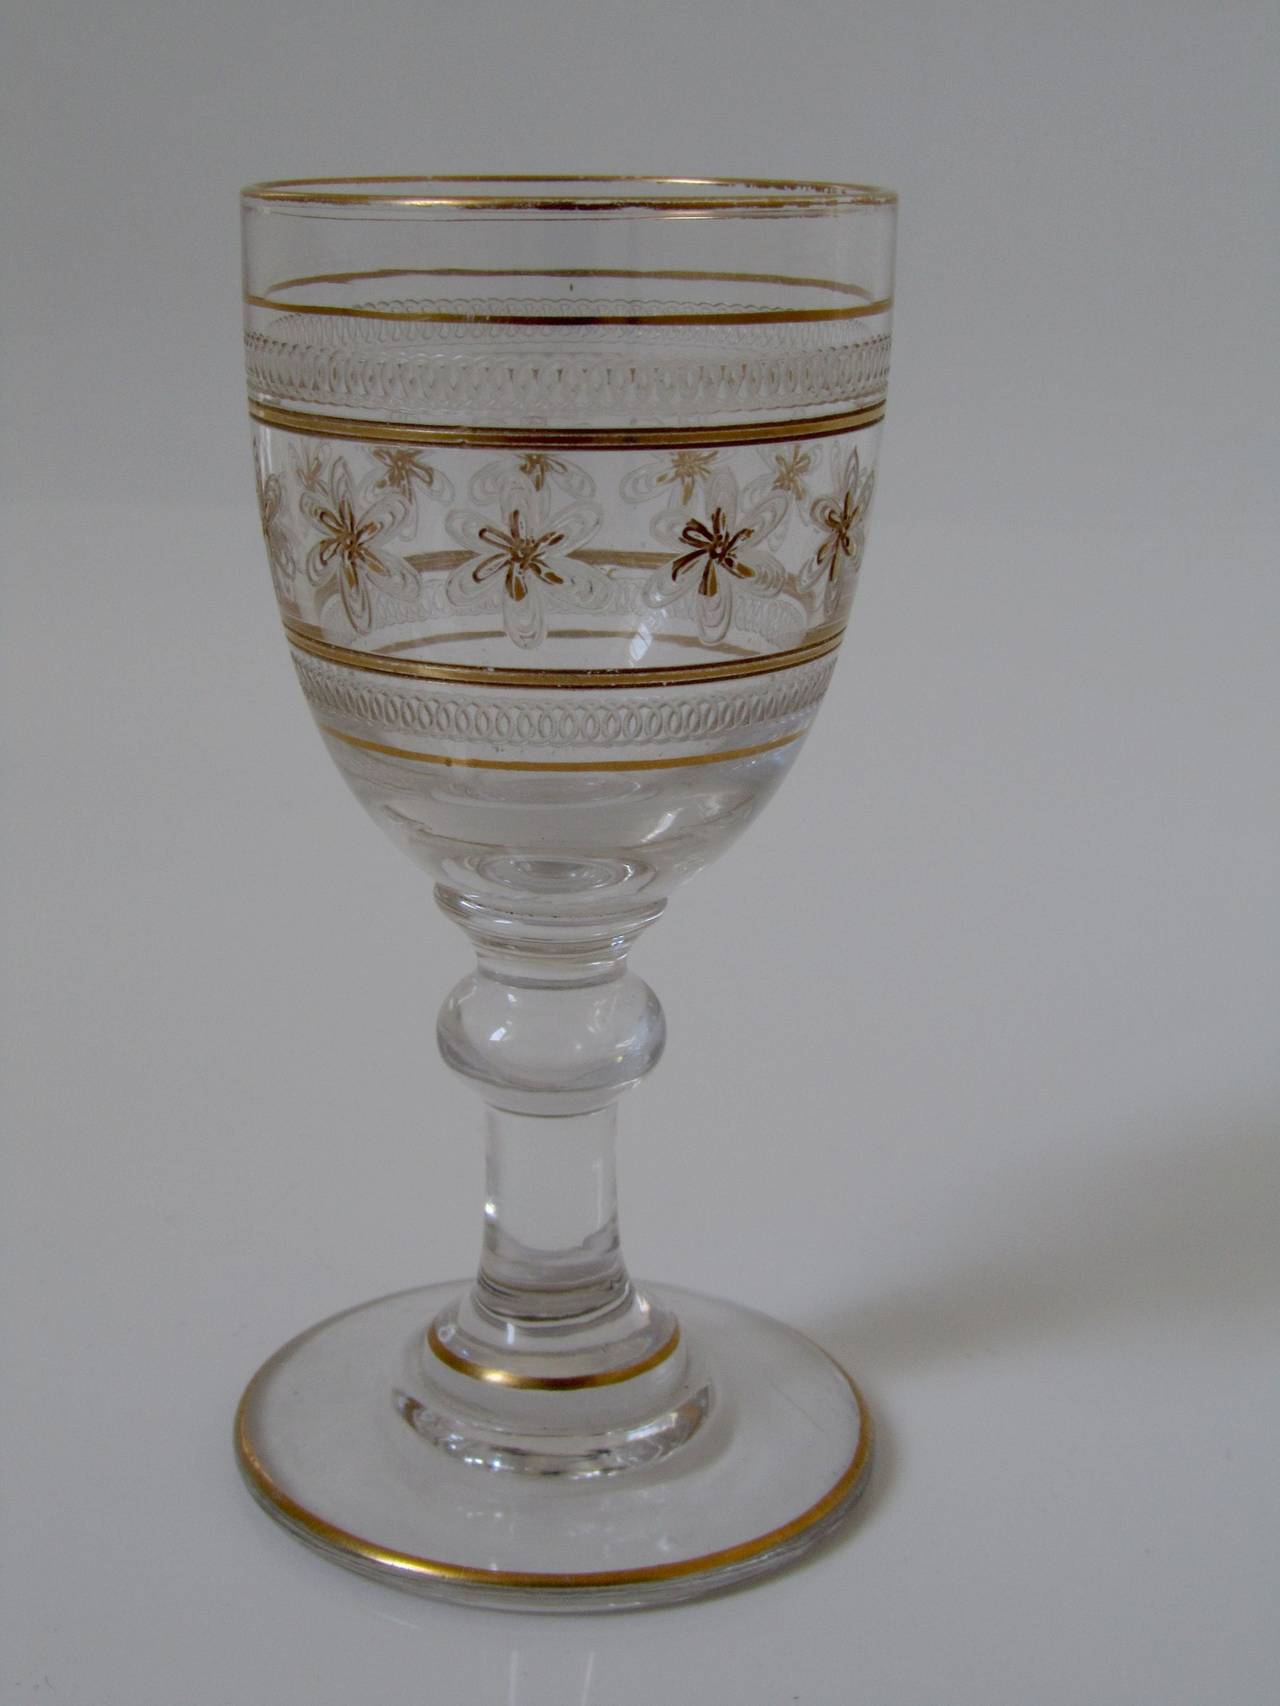 St. Louis Antique French Crystal Gilded Liquor or Aperitif Serving Set For Sale 2